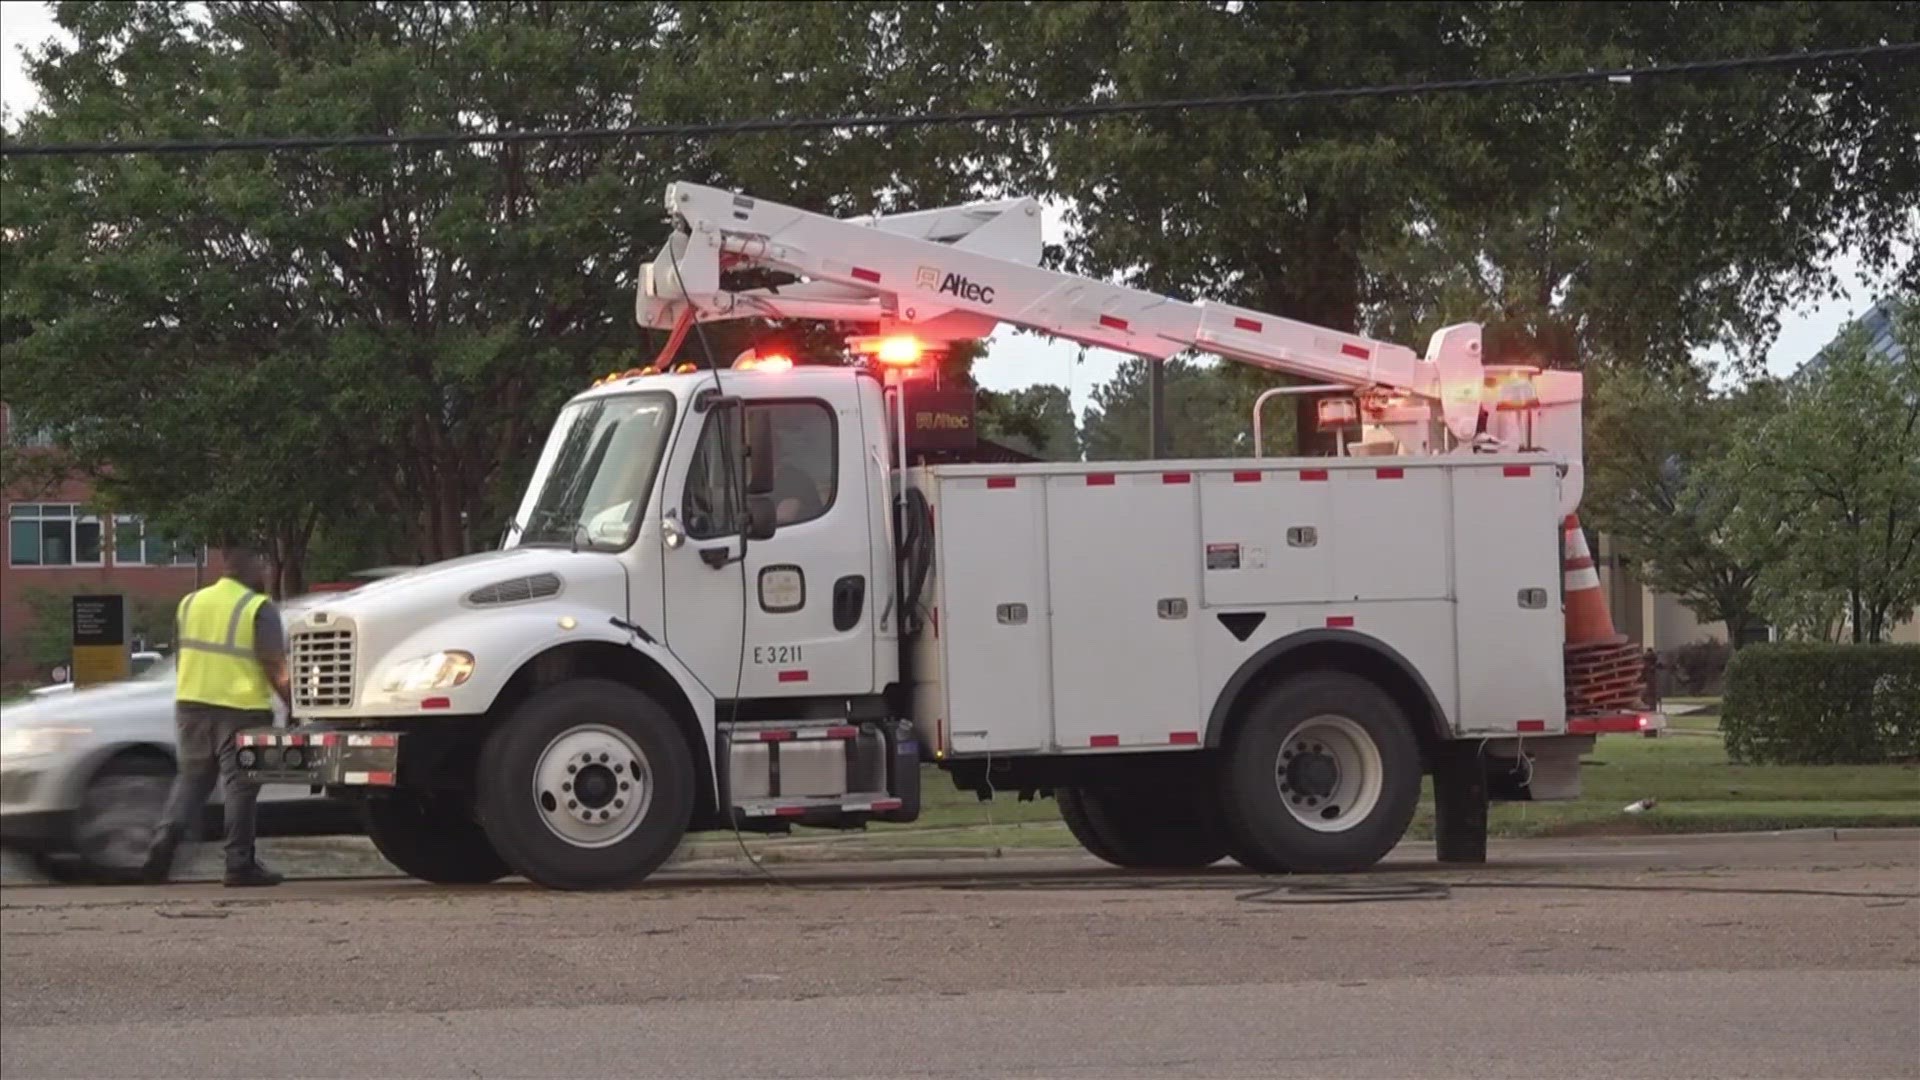 After a storm left 120,000 MLGW customers without power, the company is making progress. Near the end of June 26, more than 74,000 customers still don't have power.